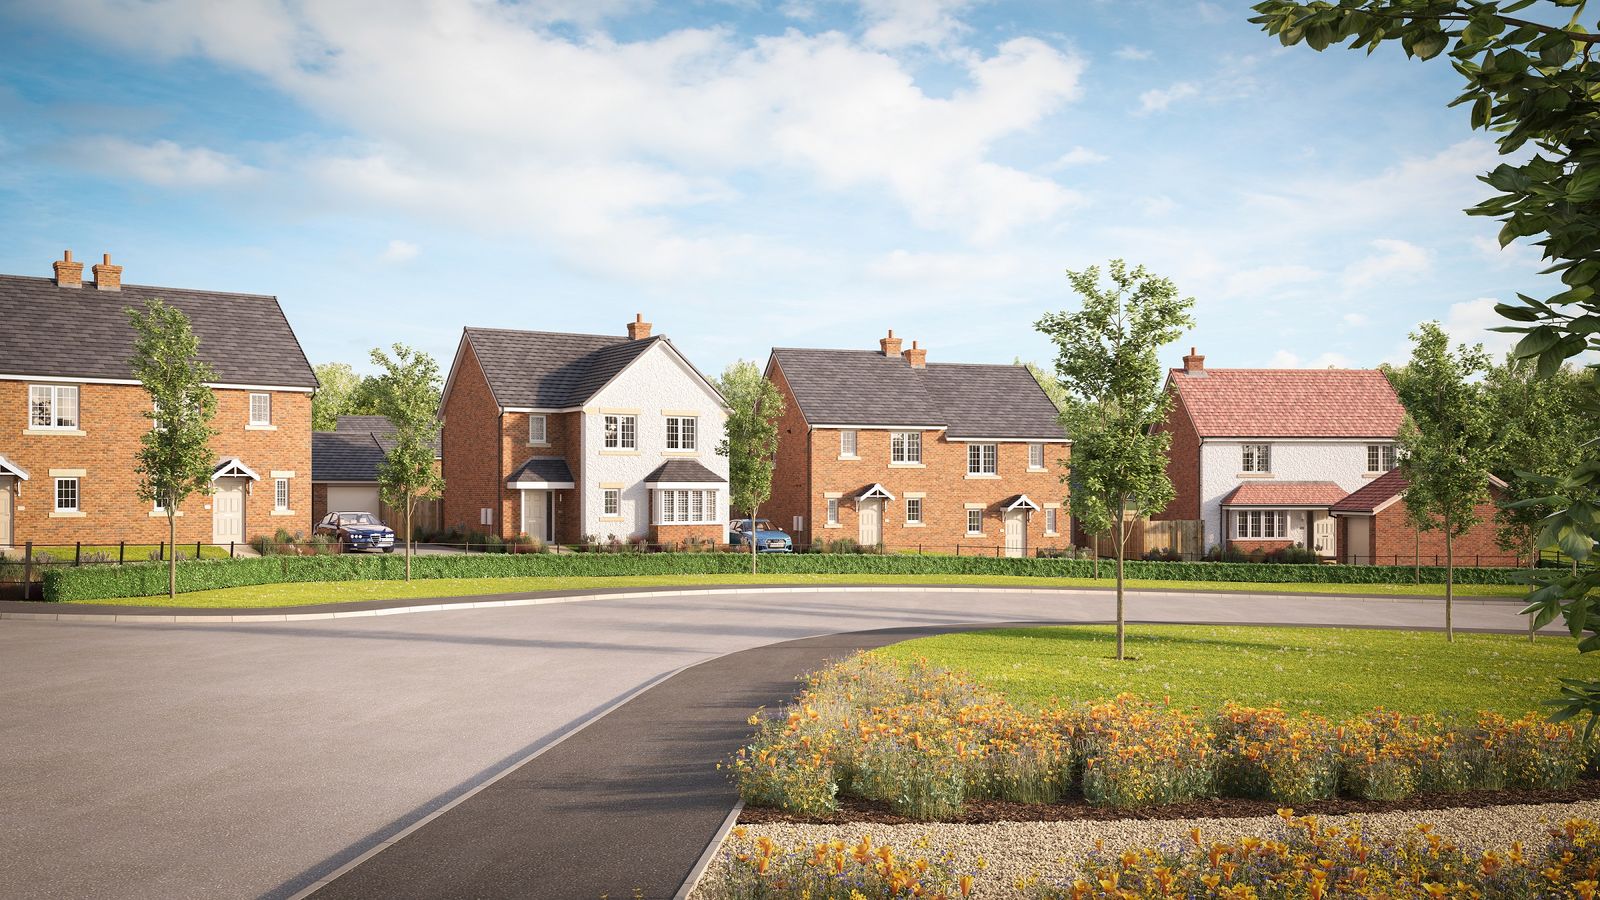 Avant Homes acquires land for £21.5m, 80-home development